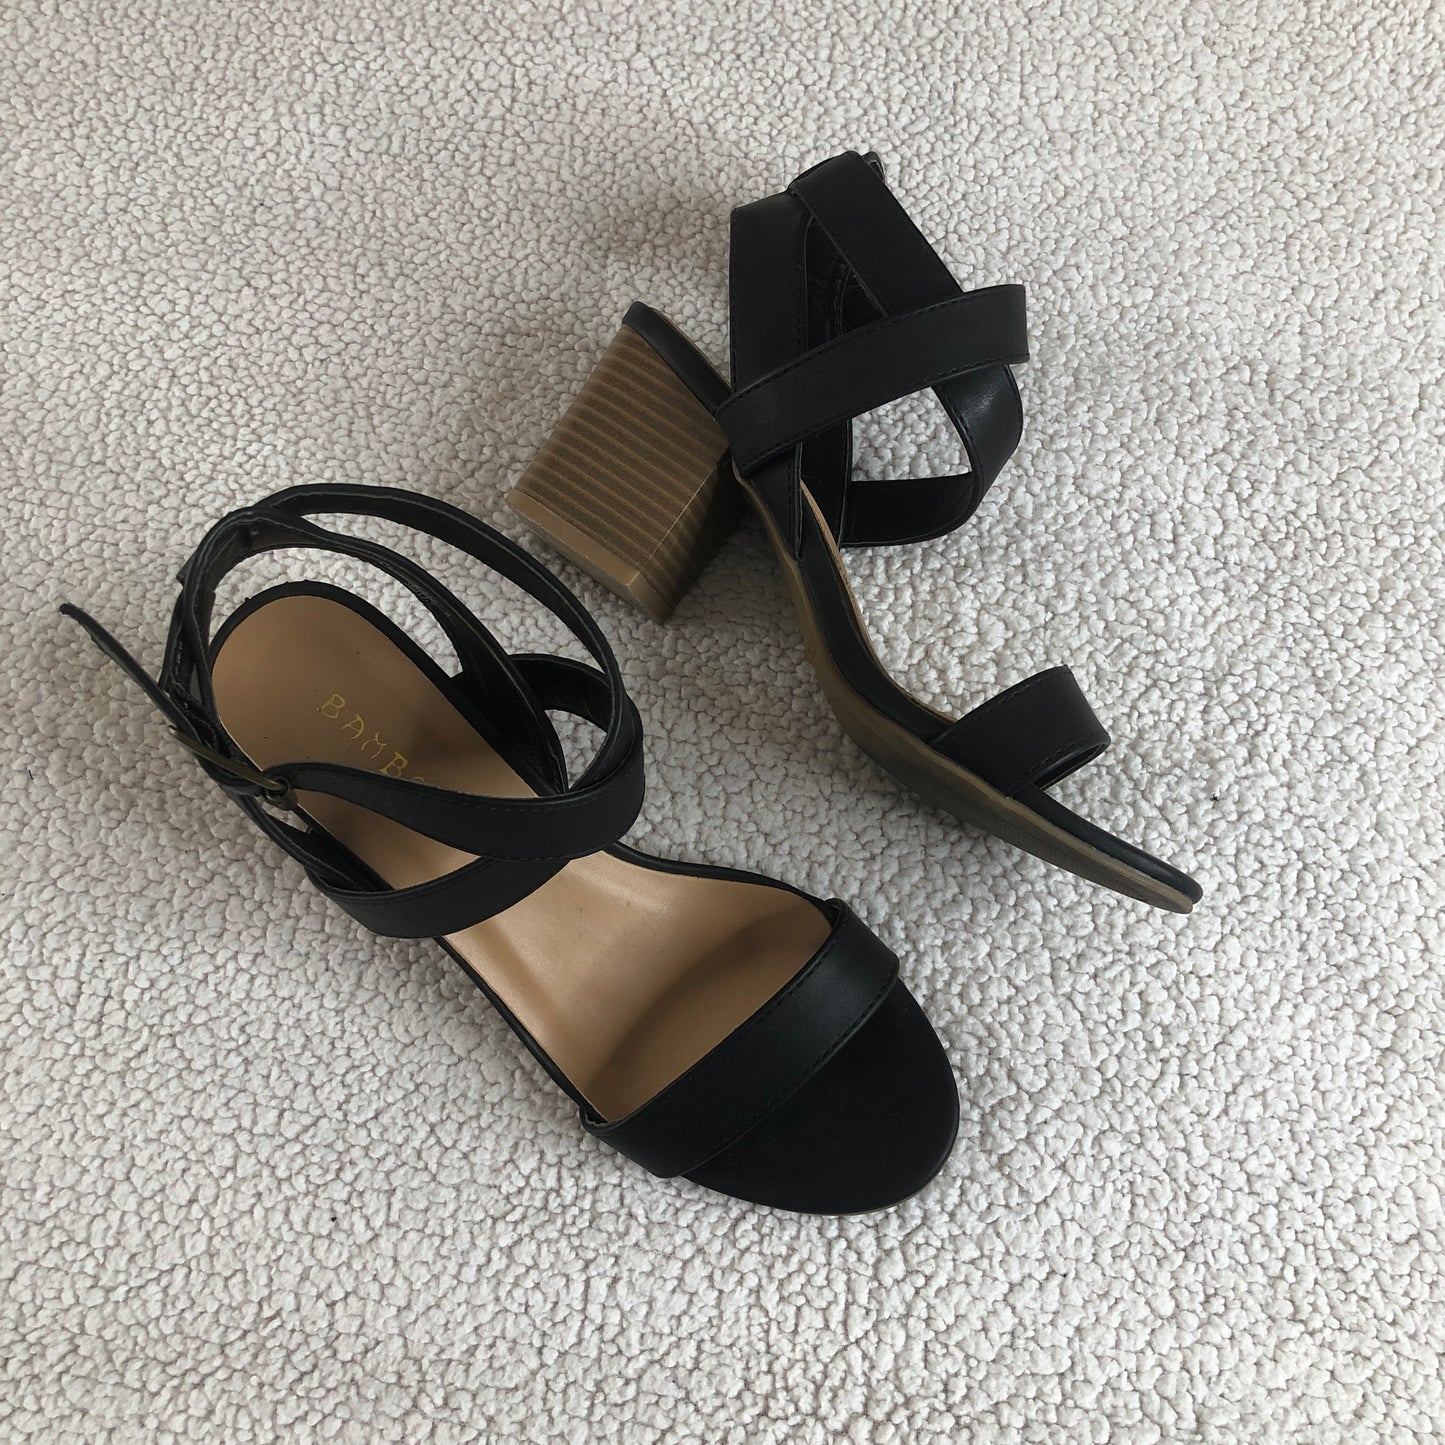 Bamboo black strappy ankle buckle cross strap heeled sandals